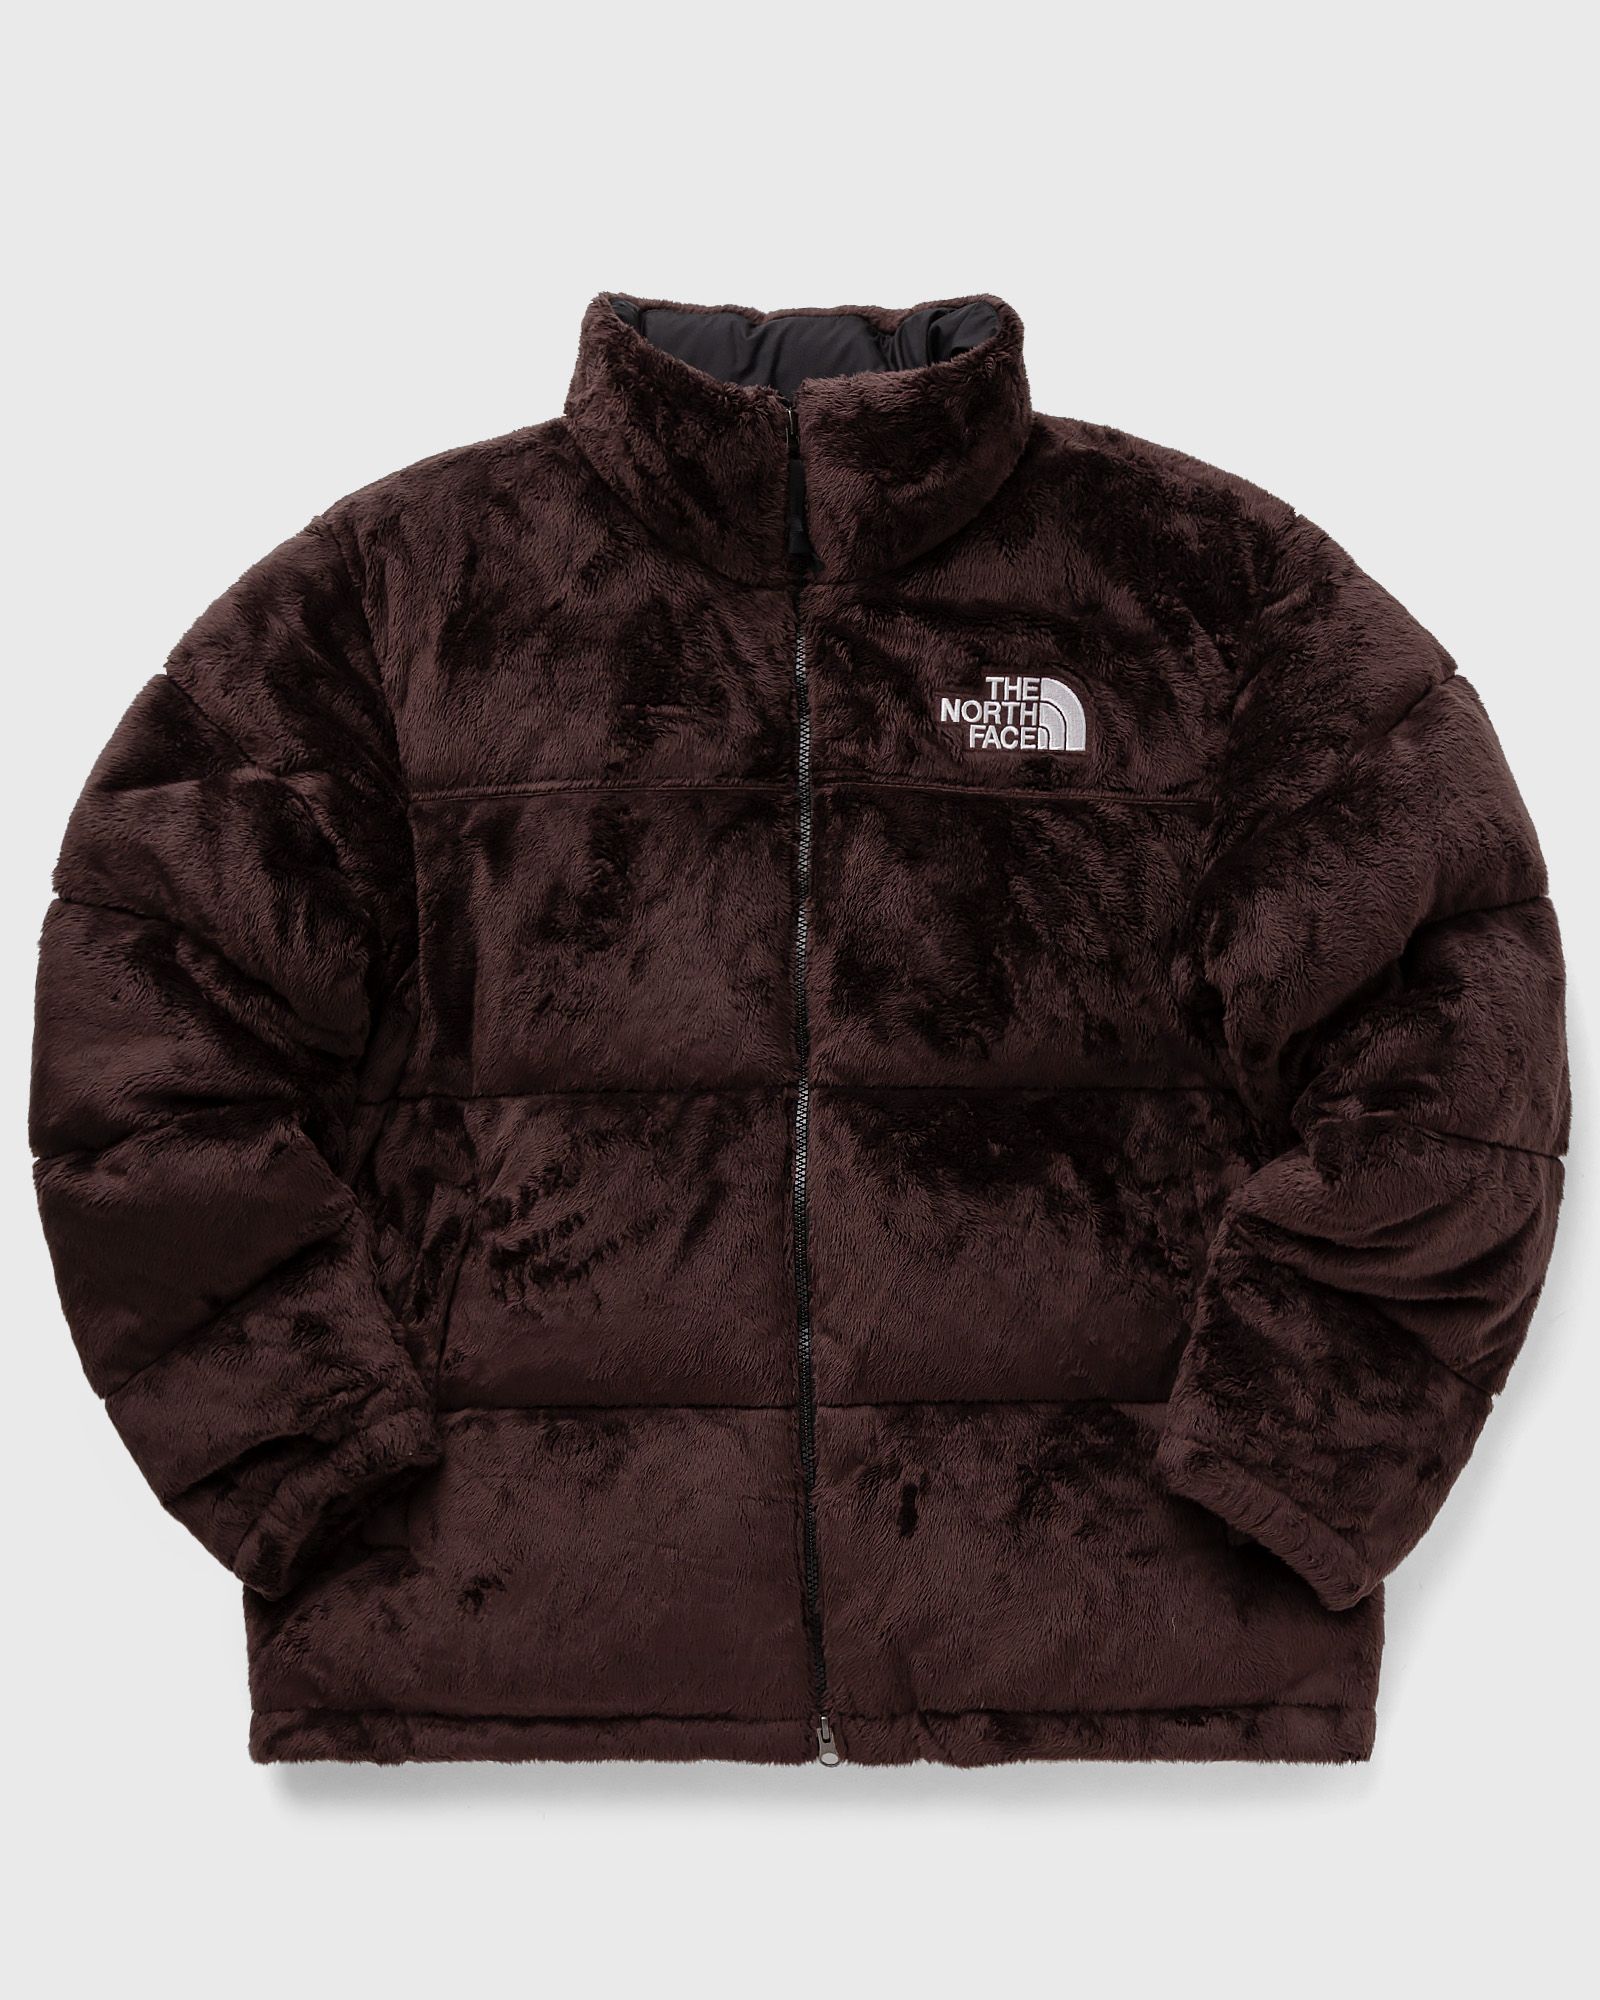 The North Face Hmlyn Down Parka Black/Brown | BSTN Store